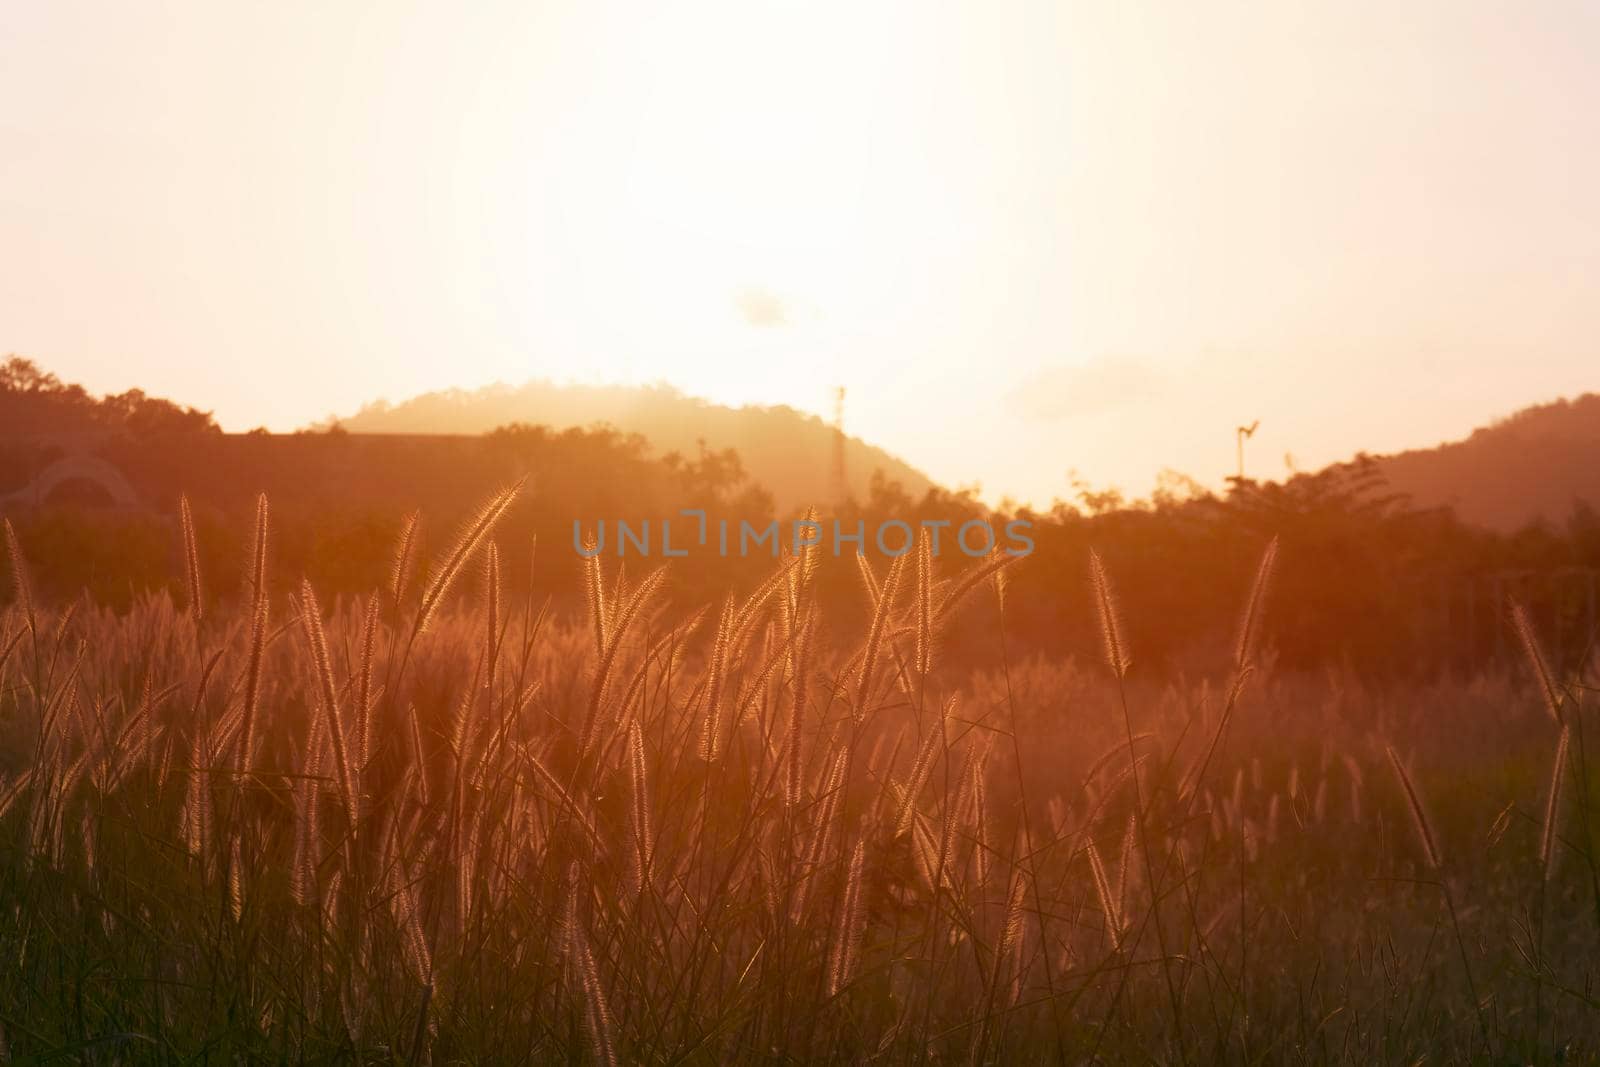 Cogon glass, grass flower or pennisetum with sunrise background. beatiful grass flower on side road at morning  with sunrise. Grass flowers are blooming in the morning time. nature background concept